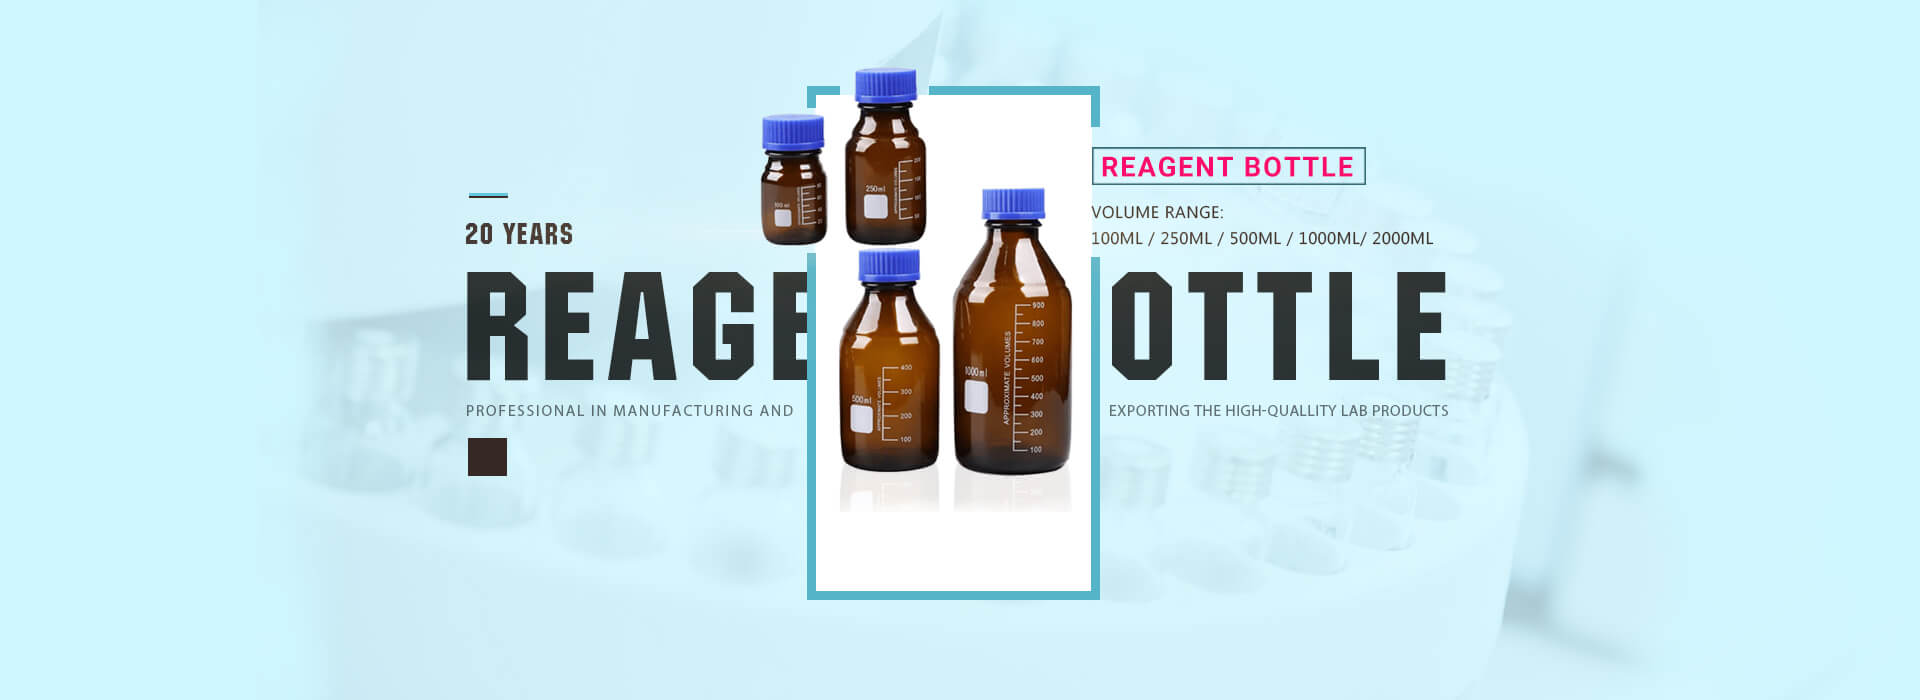 China reagent bottle chemistry factory